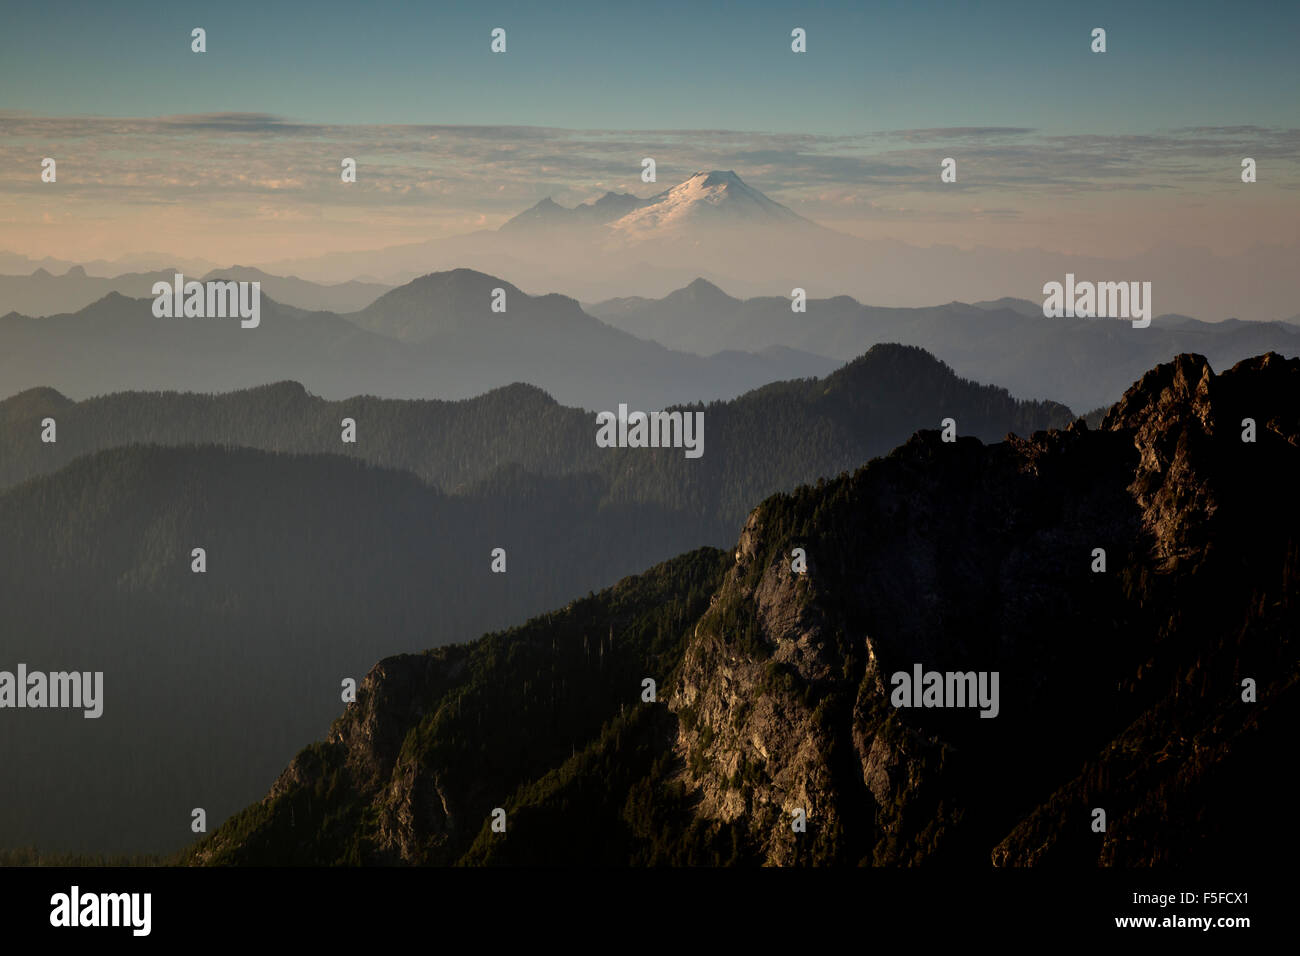 WASHINGTON - Sunset over the Cascade Mountain Range with Mount Baker standing tall over the surrounding hills and mountains. Stock Photo